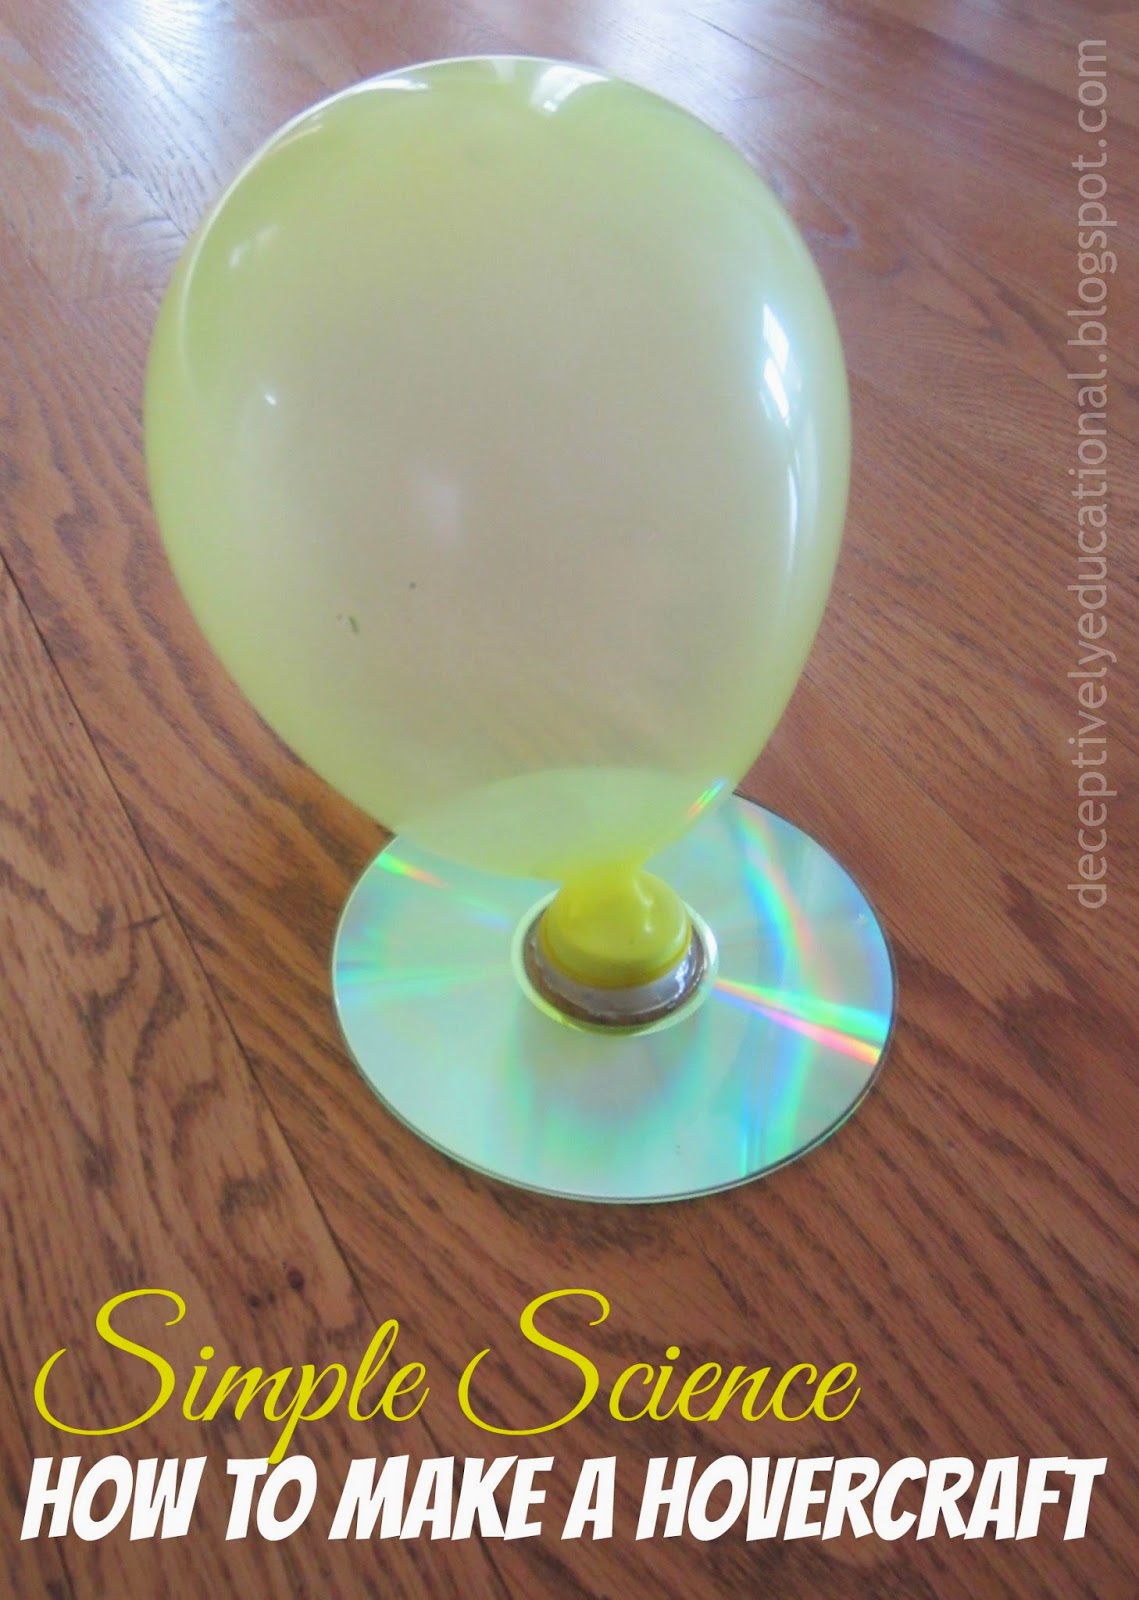 15 Fun Balloon Science Experiments for Kids - Kids Art & Craft